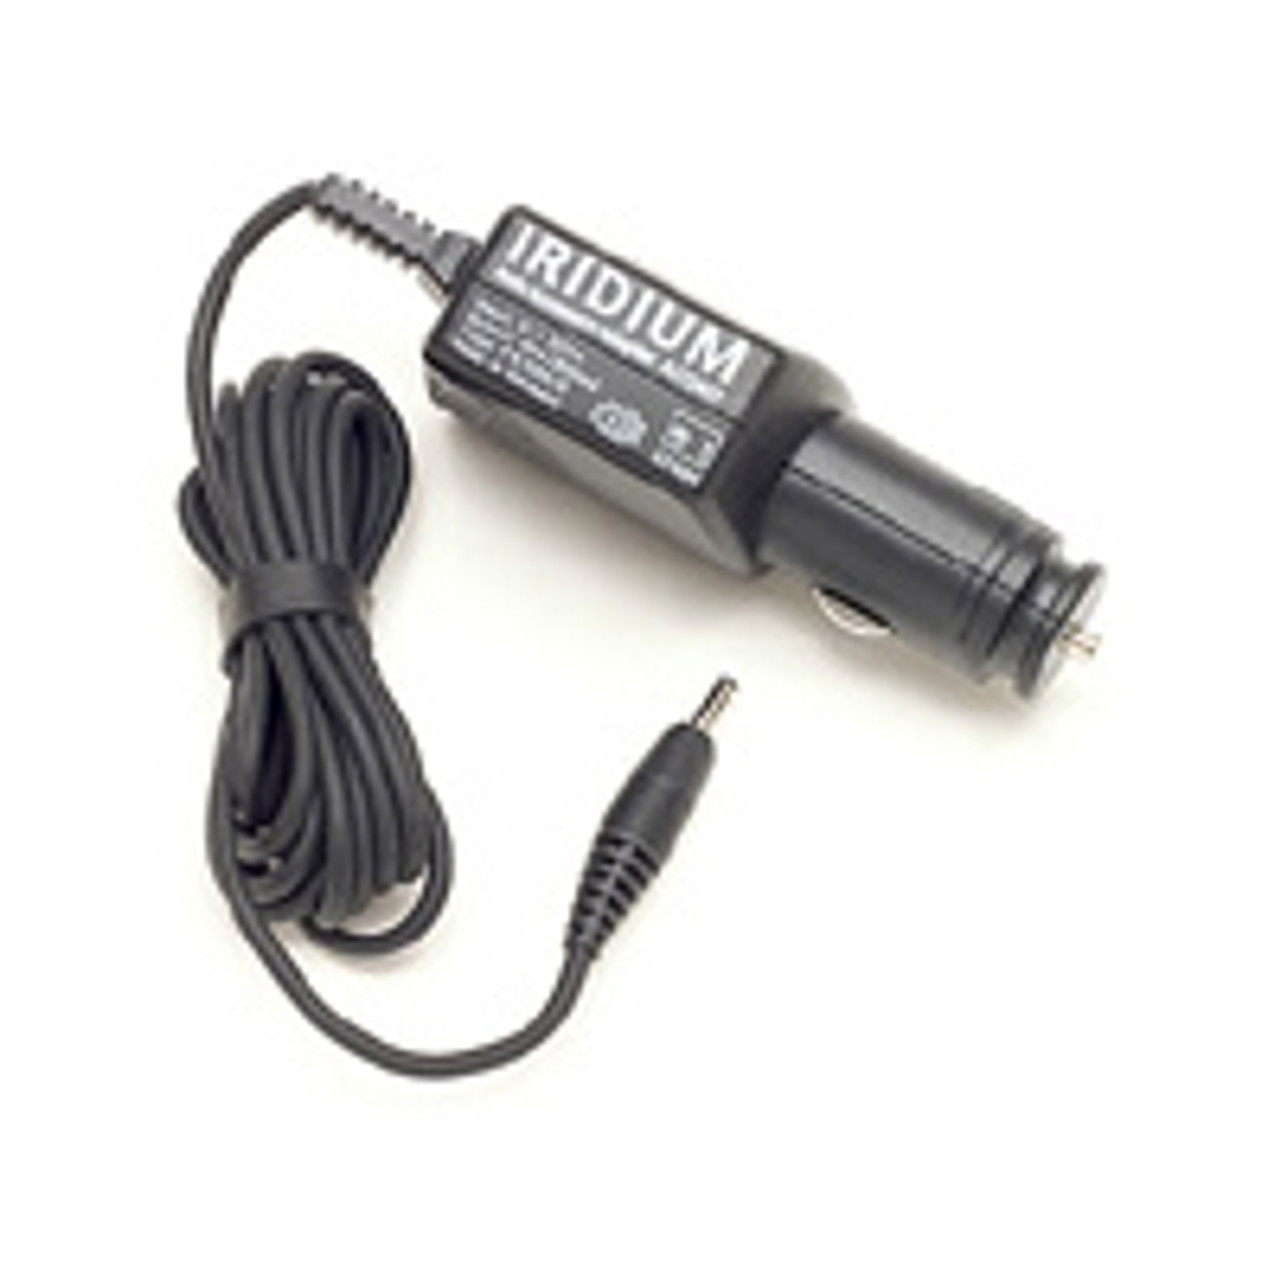 Iridium DC Auto charger for Extreme 9575,9555 & 9505A